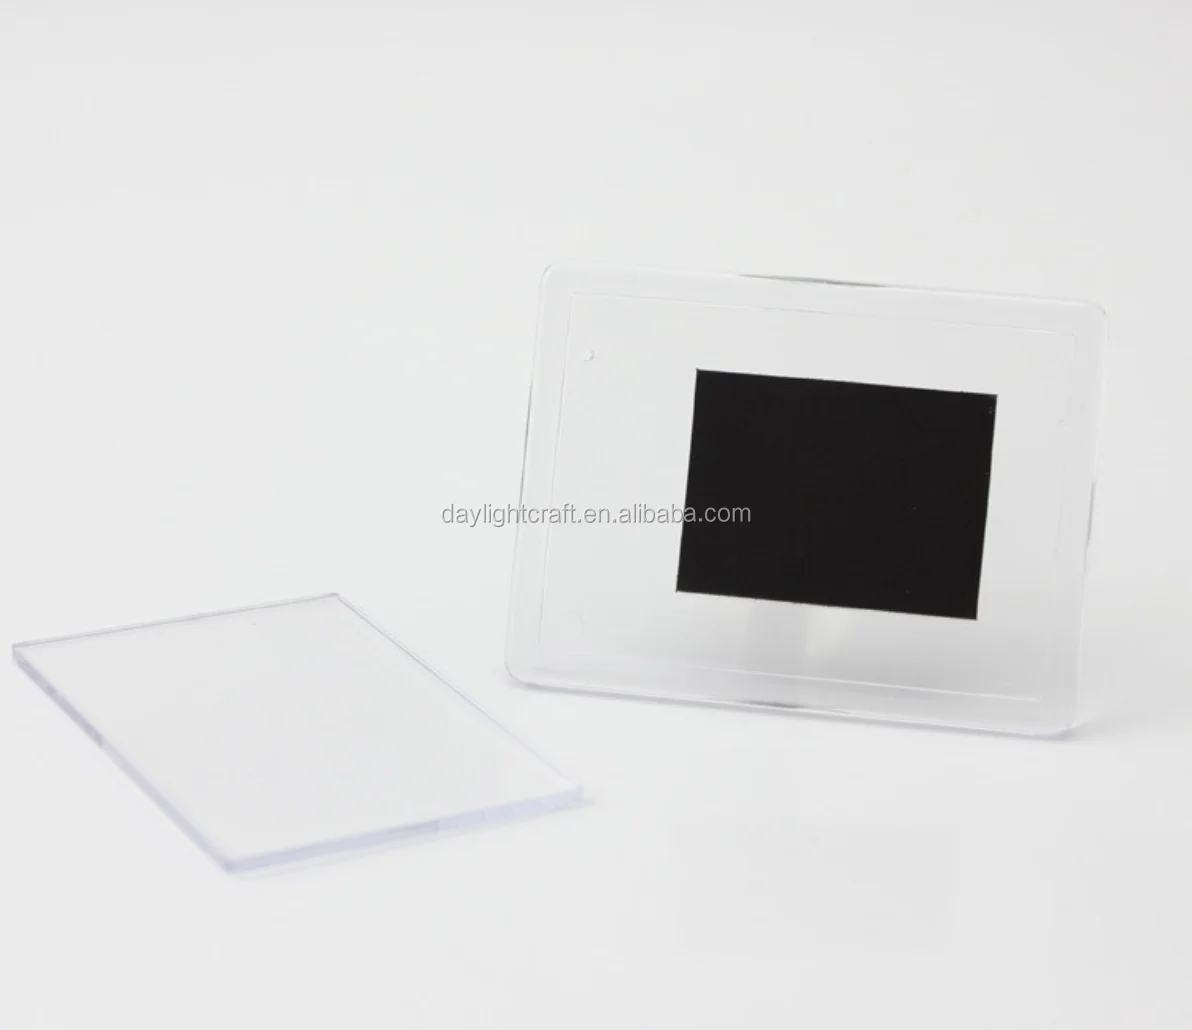 250x Clear Acrylic Blank Fridge Magnets 58 x 58 mm Square Size Photo